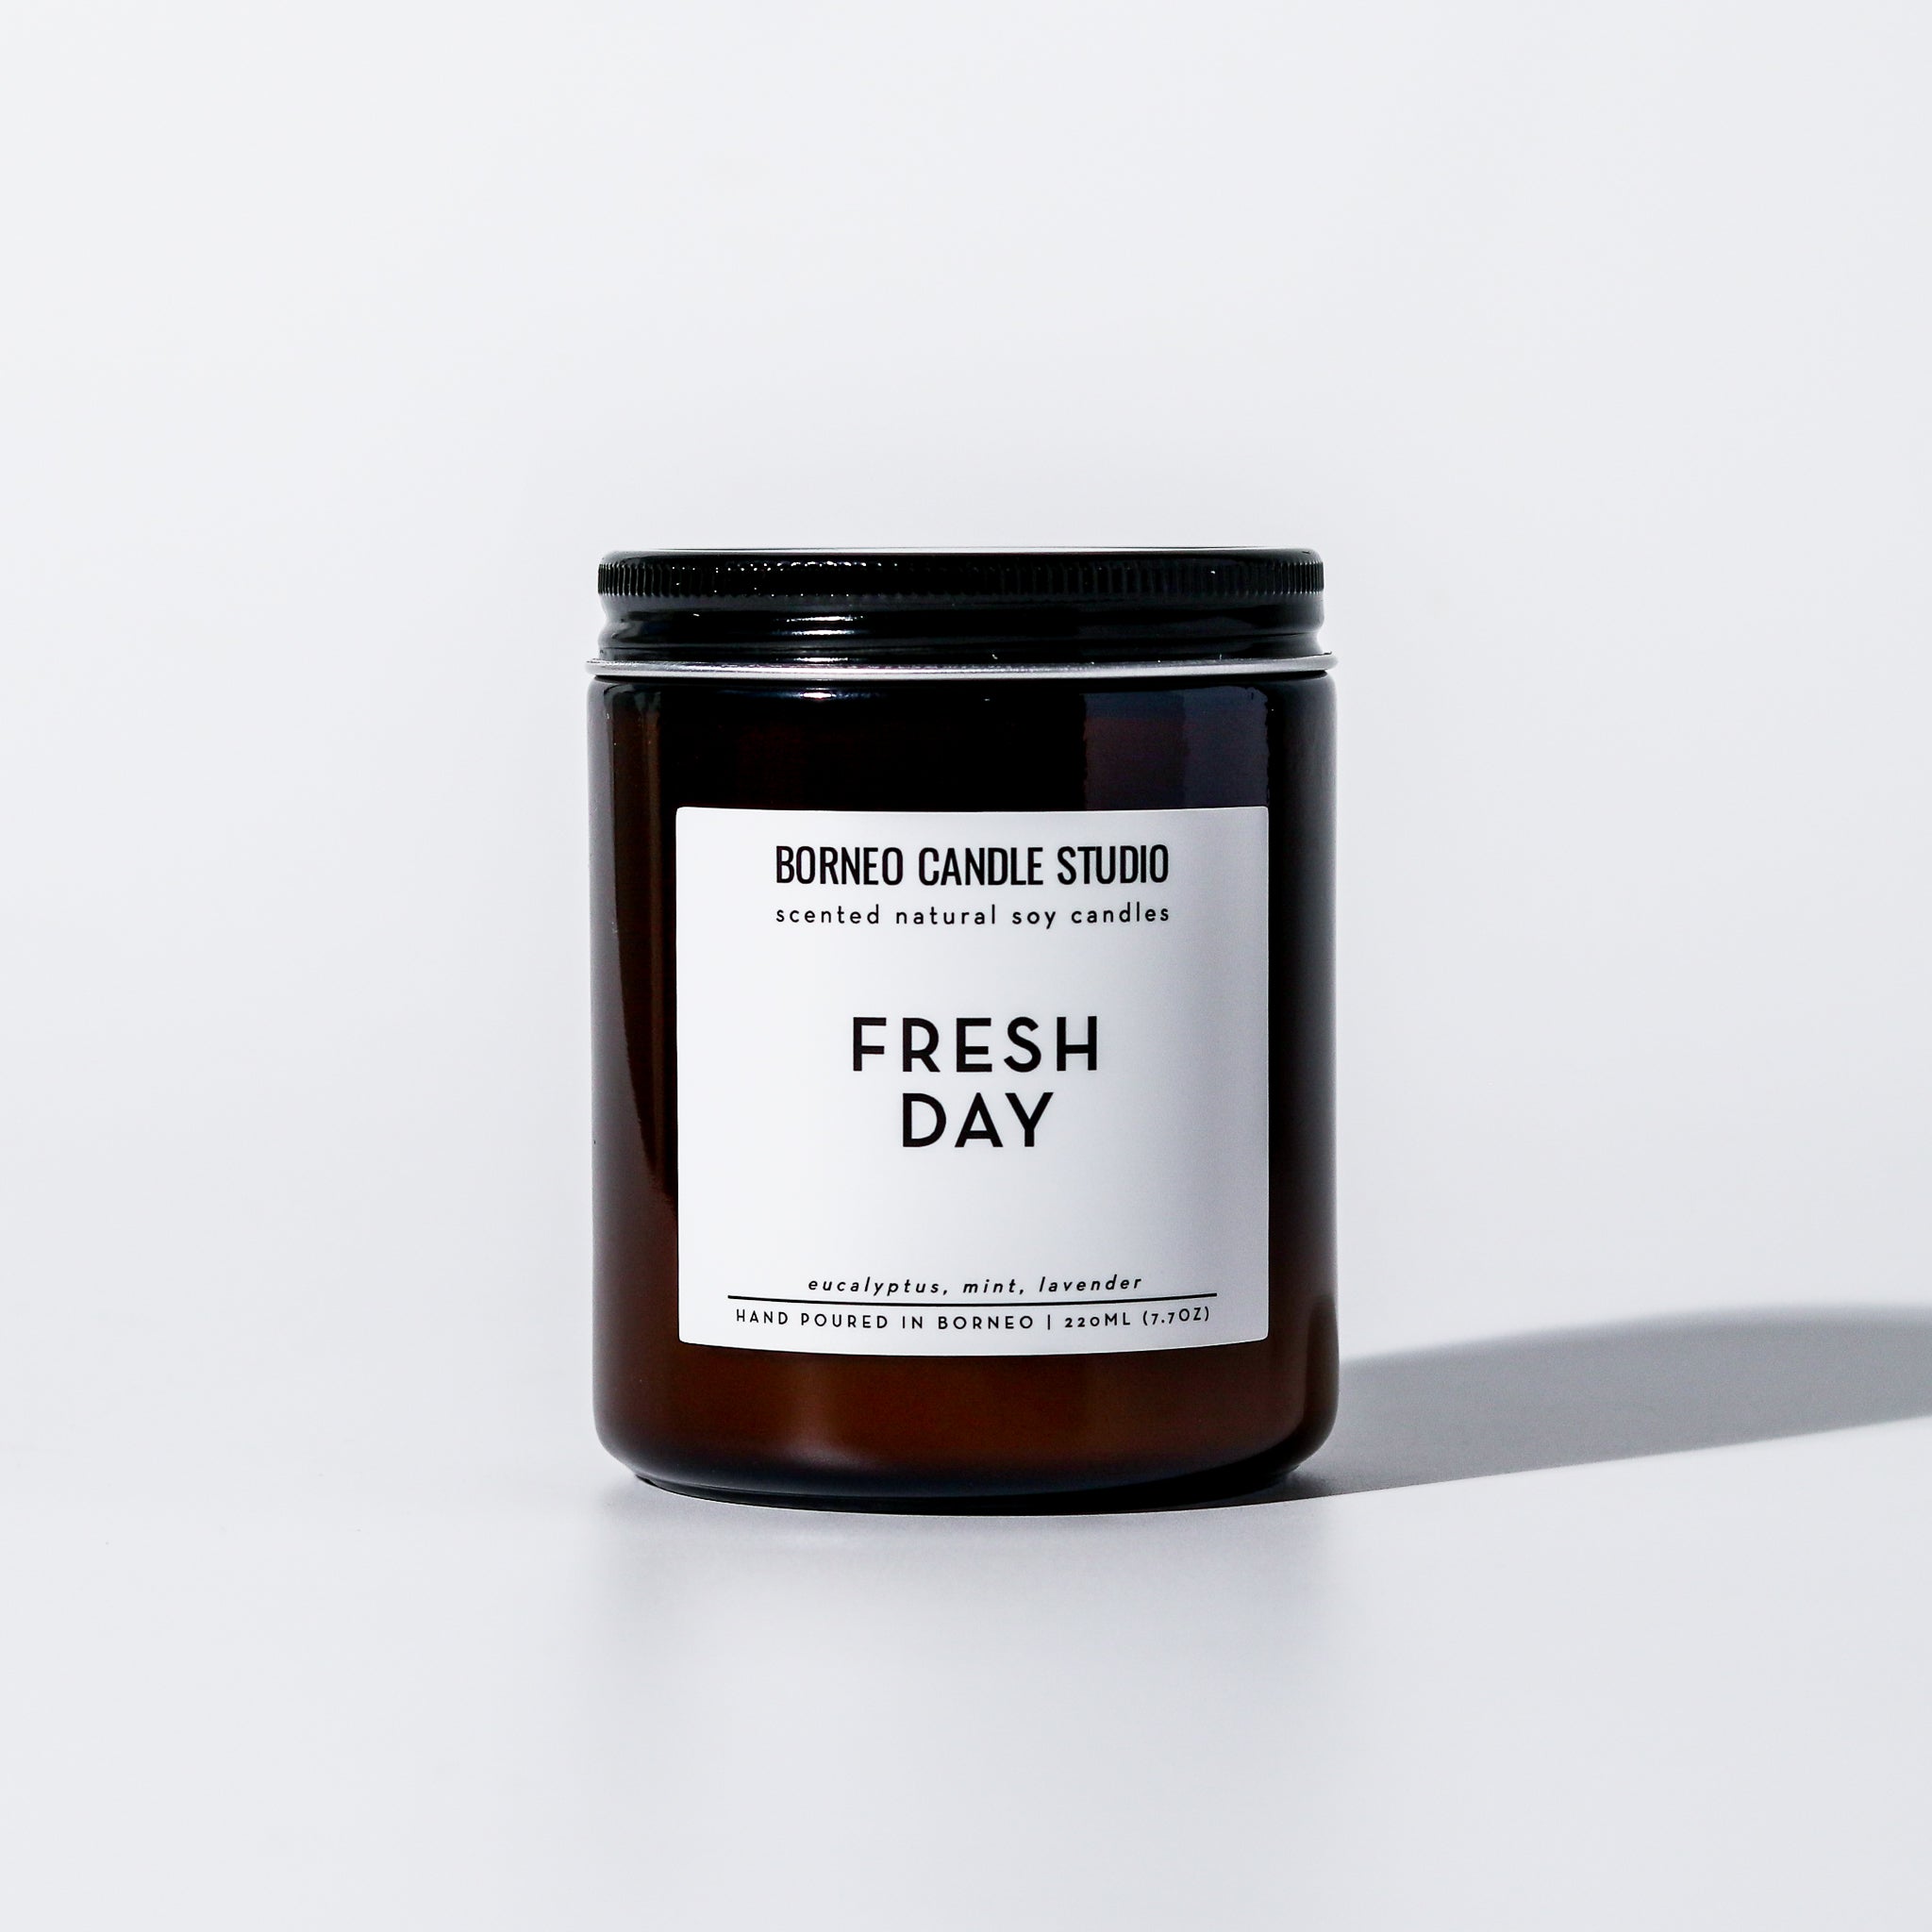 Fresh Day Soy Candle - Borneo Candle Studio